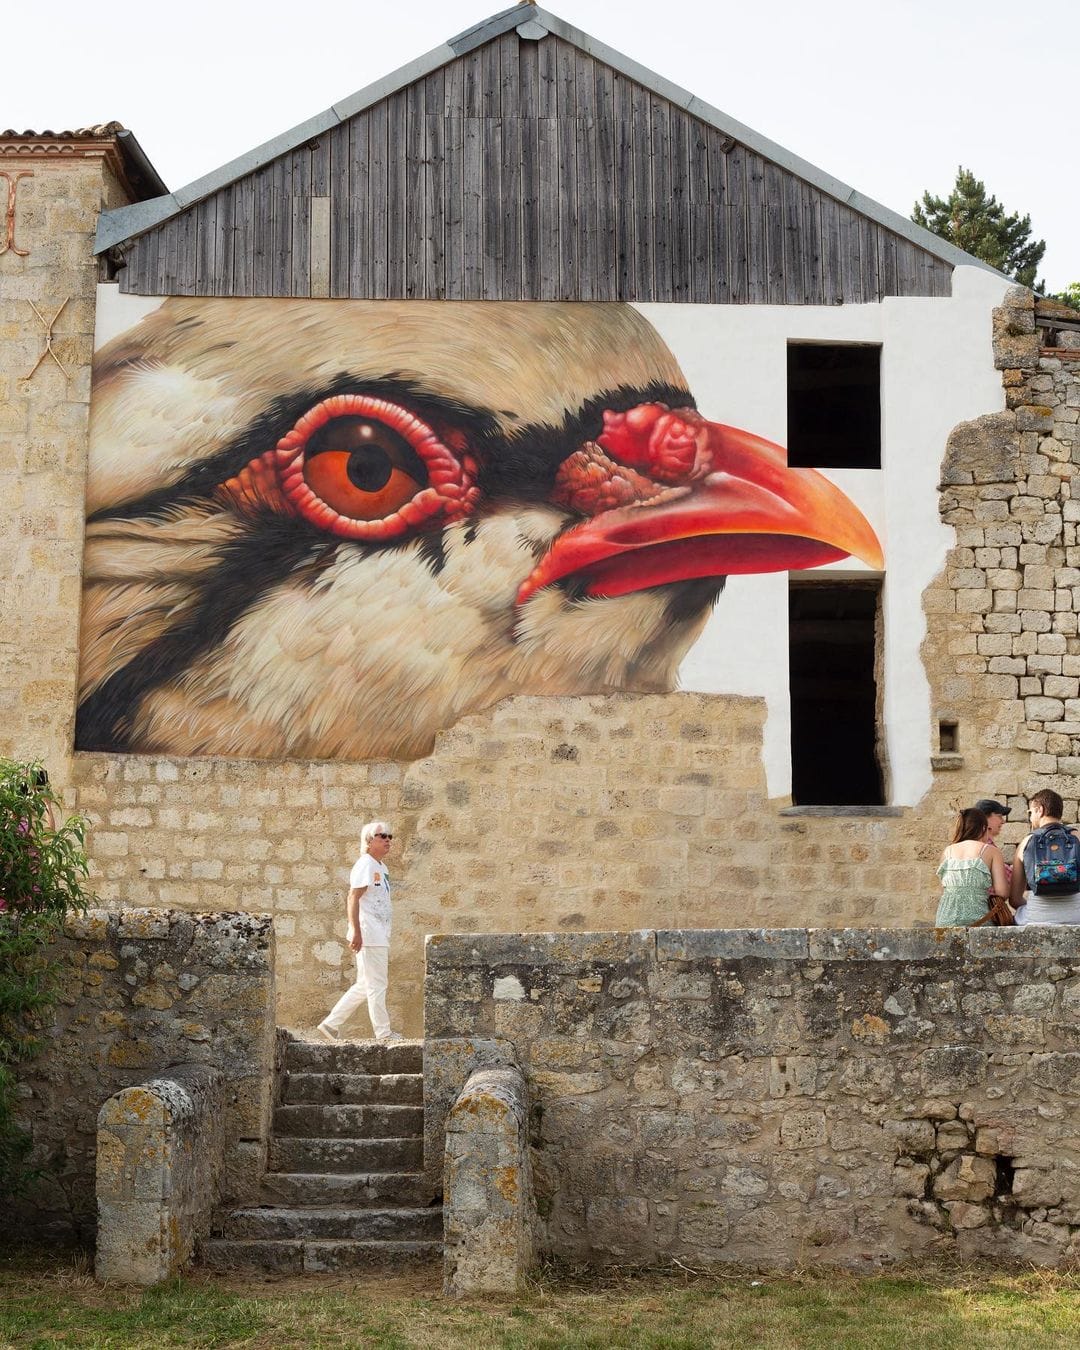 Wall fresco by Adèle Renault representing a red-billed sparrow